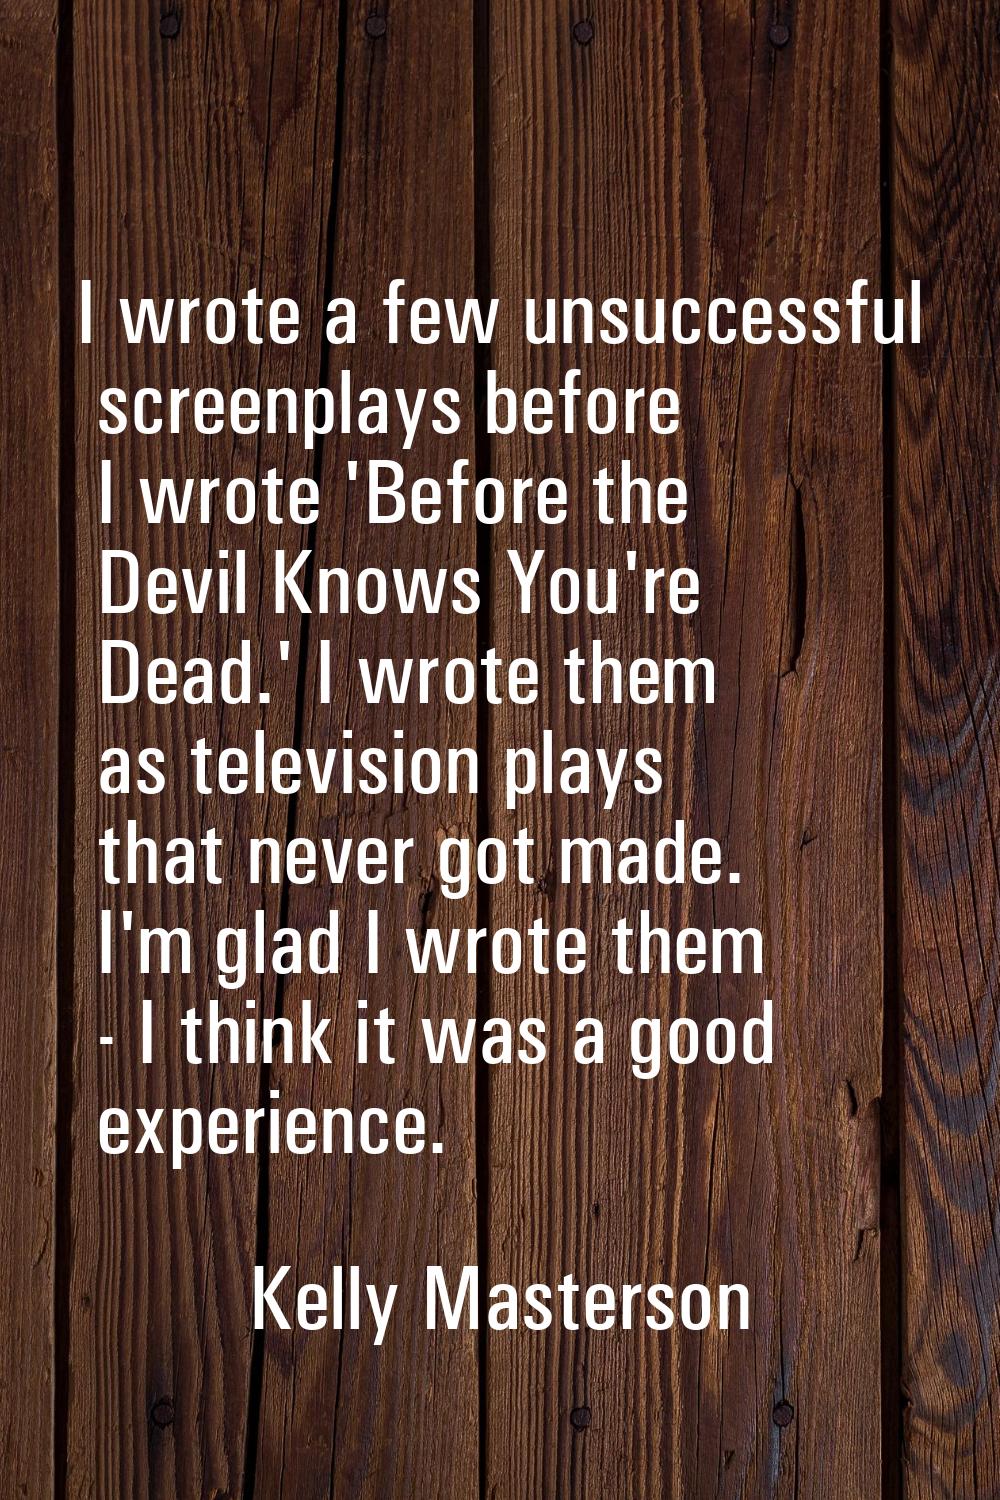 I wrote a few unsuccessful screenplays before I wrote 'Before the Devil Knows You're Dead.' I wrote